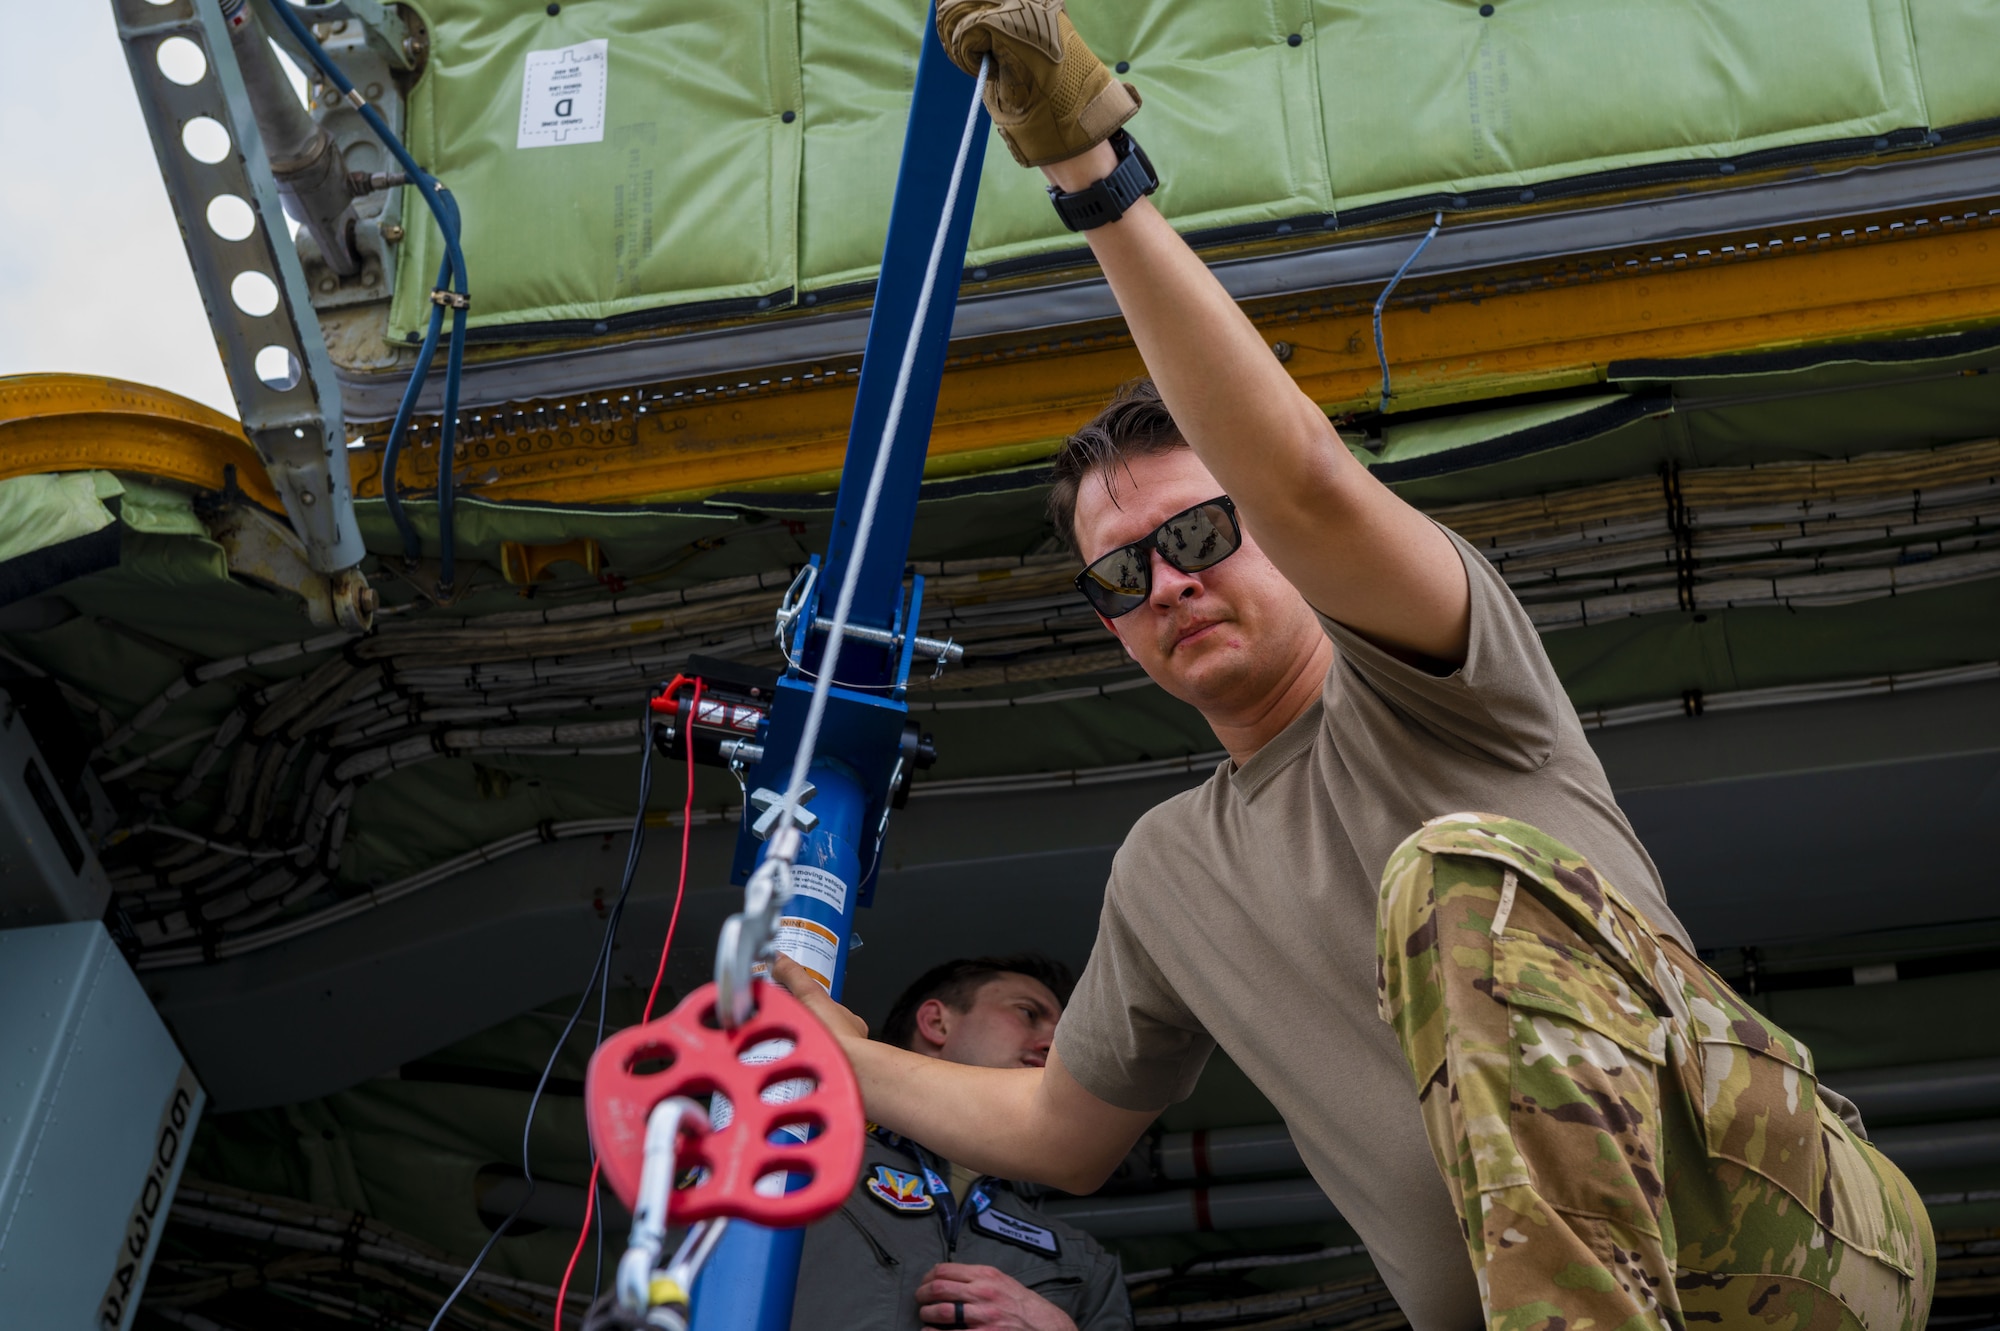 U.S. Air Force Tech. Sgt. Nicholas Sowder, 509th Weapons Squadron Advanced Instructor Training cadre and inflight refueling specialist, operates the Pack and Transport Reloader (PATR) crane prototype at Hurlburt Field, Florida, May 12, 2023. The 509th WPS partnered with Fairchild Air Force Base’s innovation cell to create the crane with a goal of expanding the KC-135 Stratotanker’s ability to load and unload various types of cargo using the PATR crane prototype. (U.S. Air Force photo by Staff Sgt. Lawrence Sena)